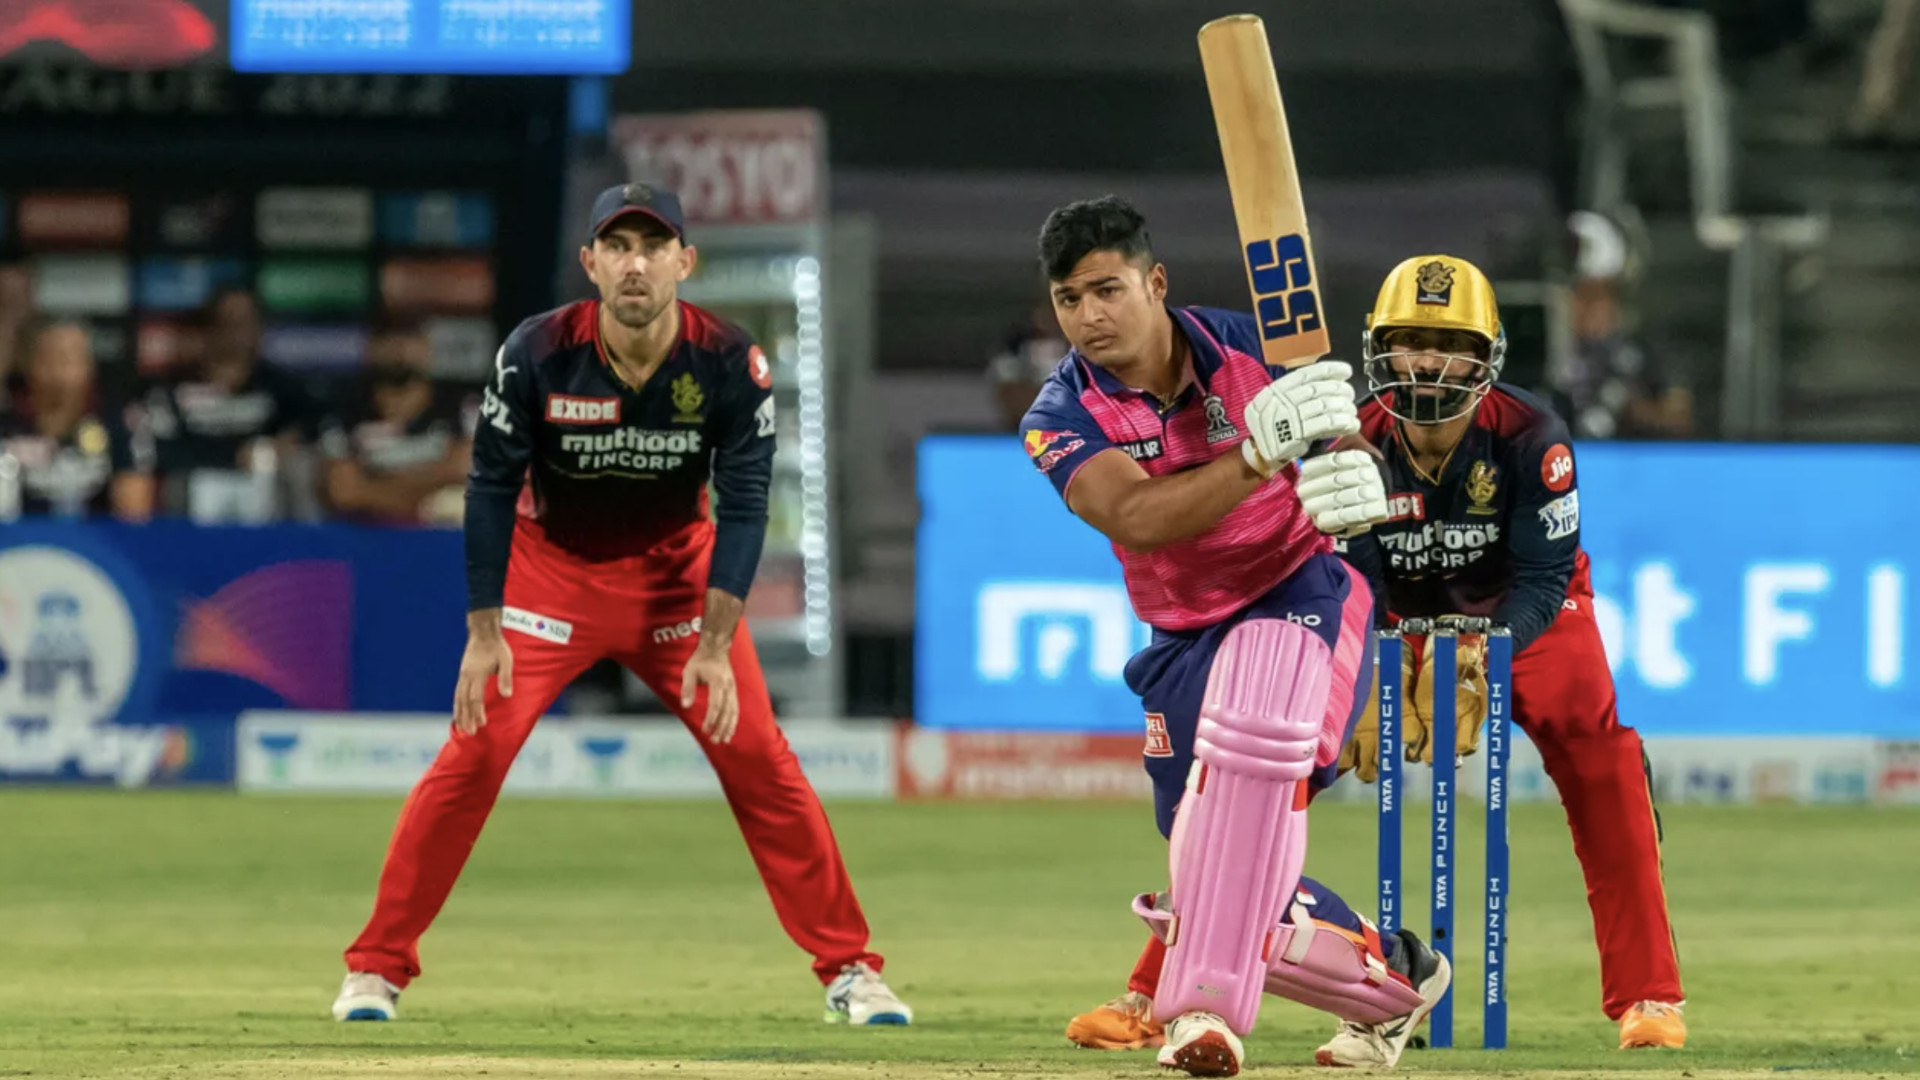 Rajasthan Royals vs Royal Challengers Bangalore live stream how to